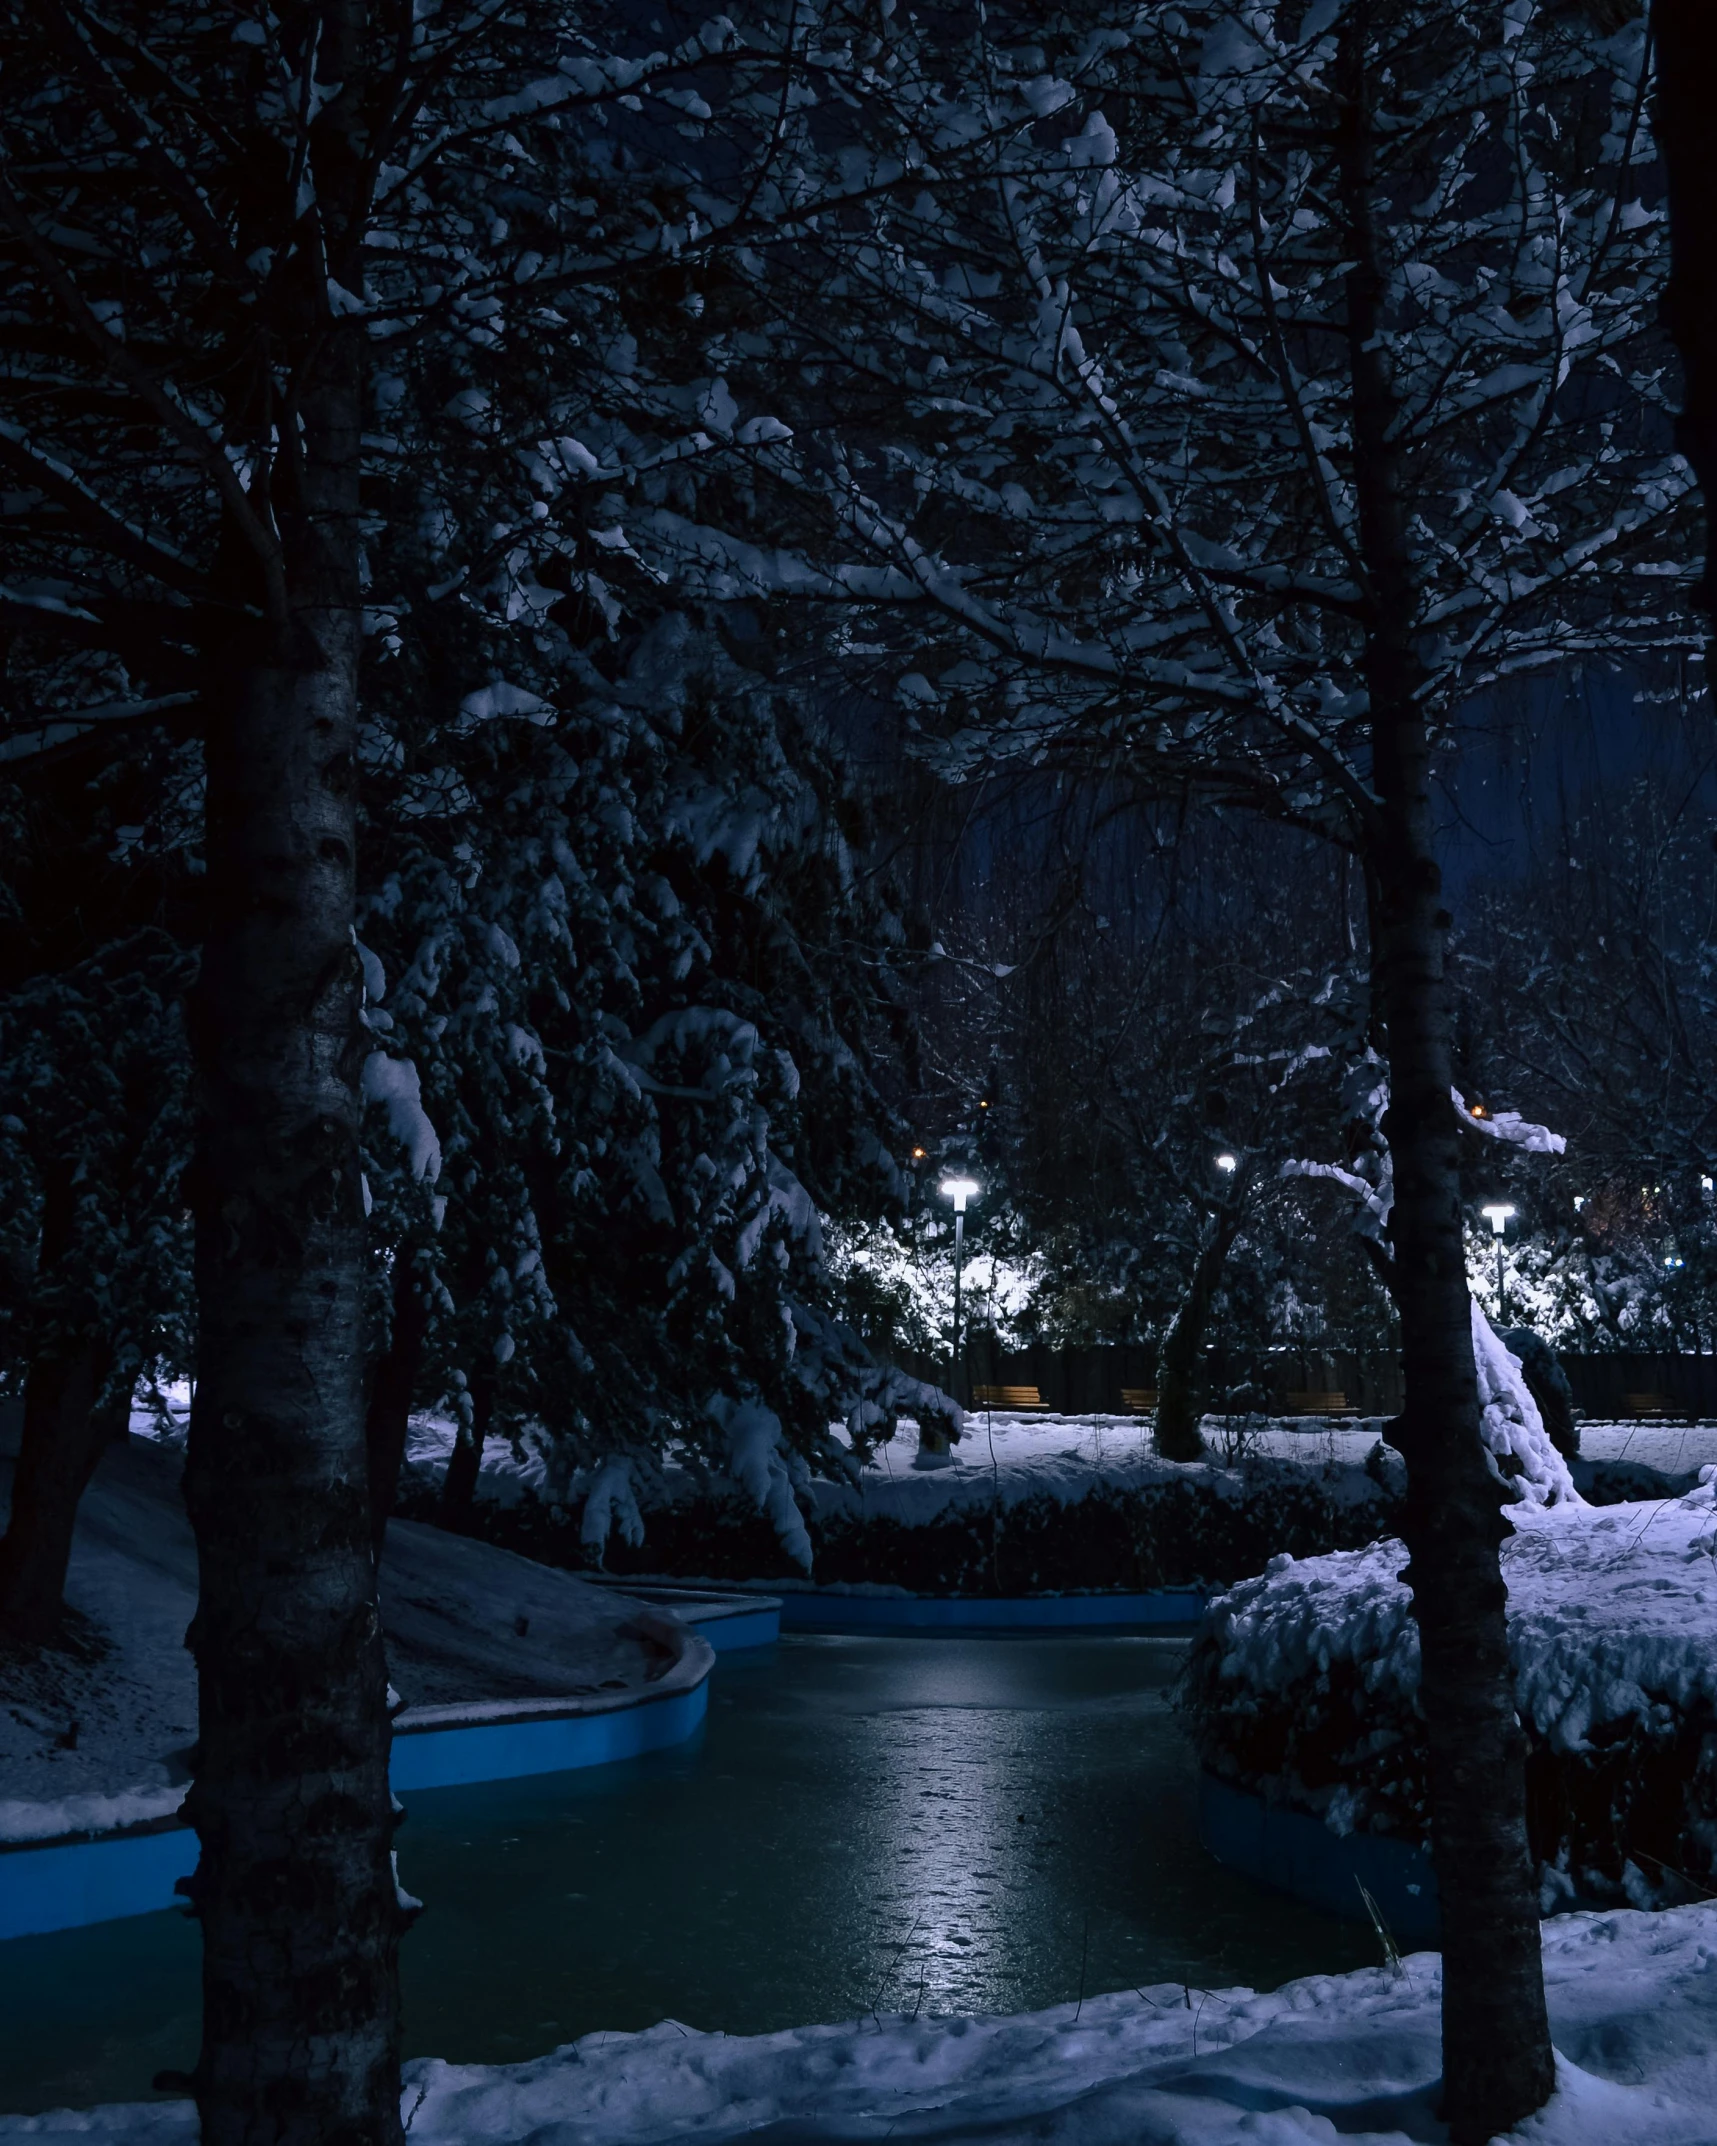 a pond in a park is covered by snow and trees at night